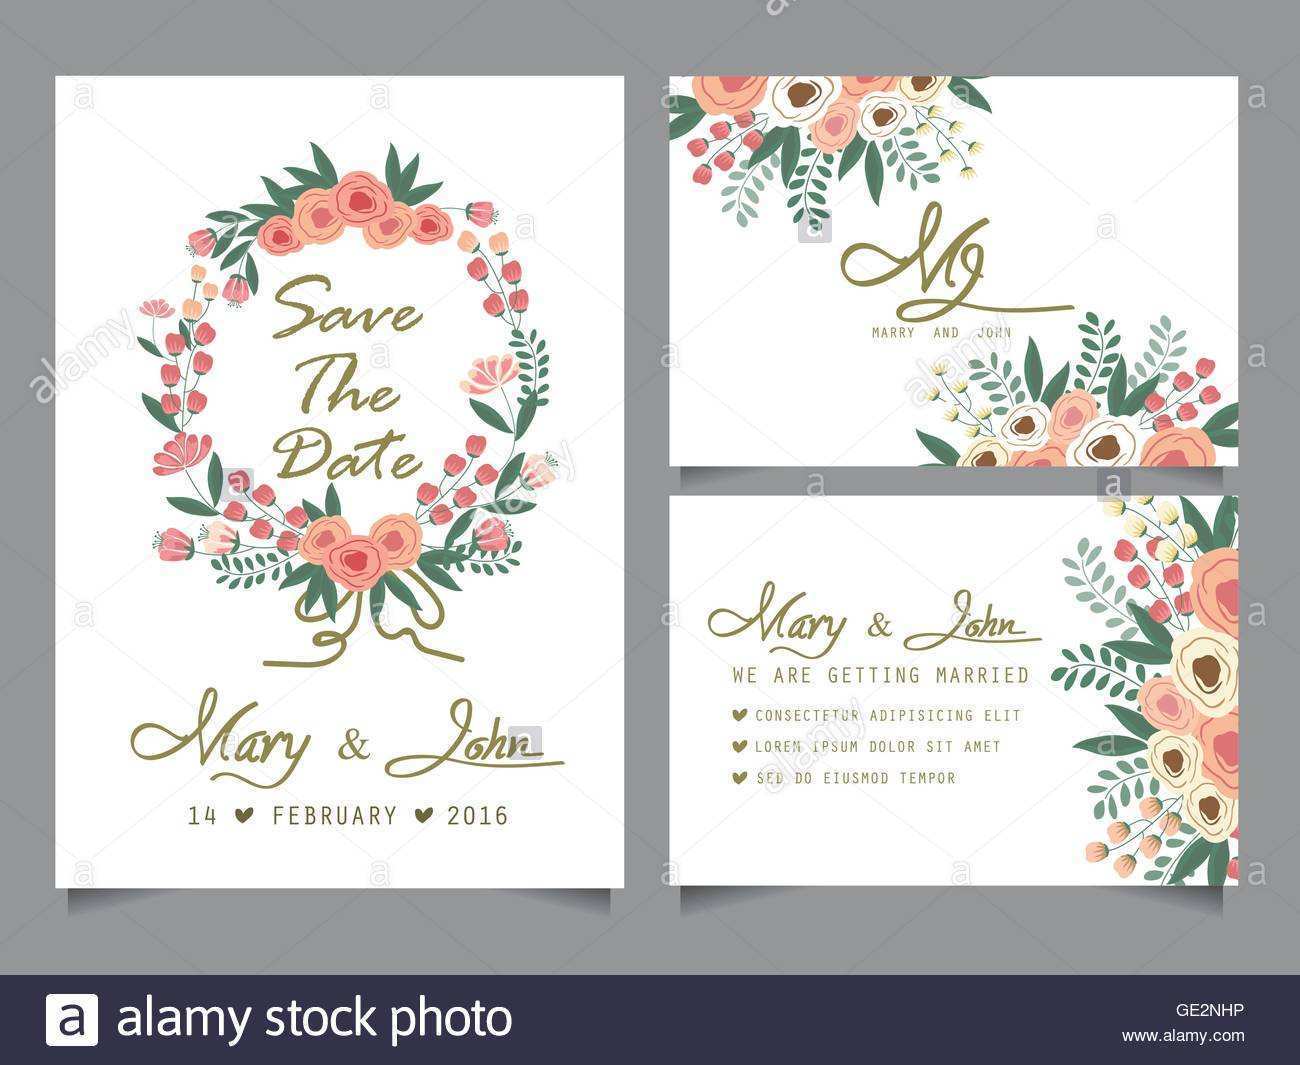 91 Creating Wedding Card Banner Template Layouts for Wedding Card Banner Template